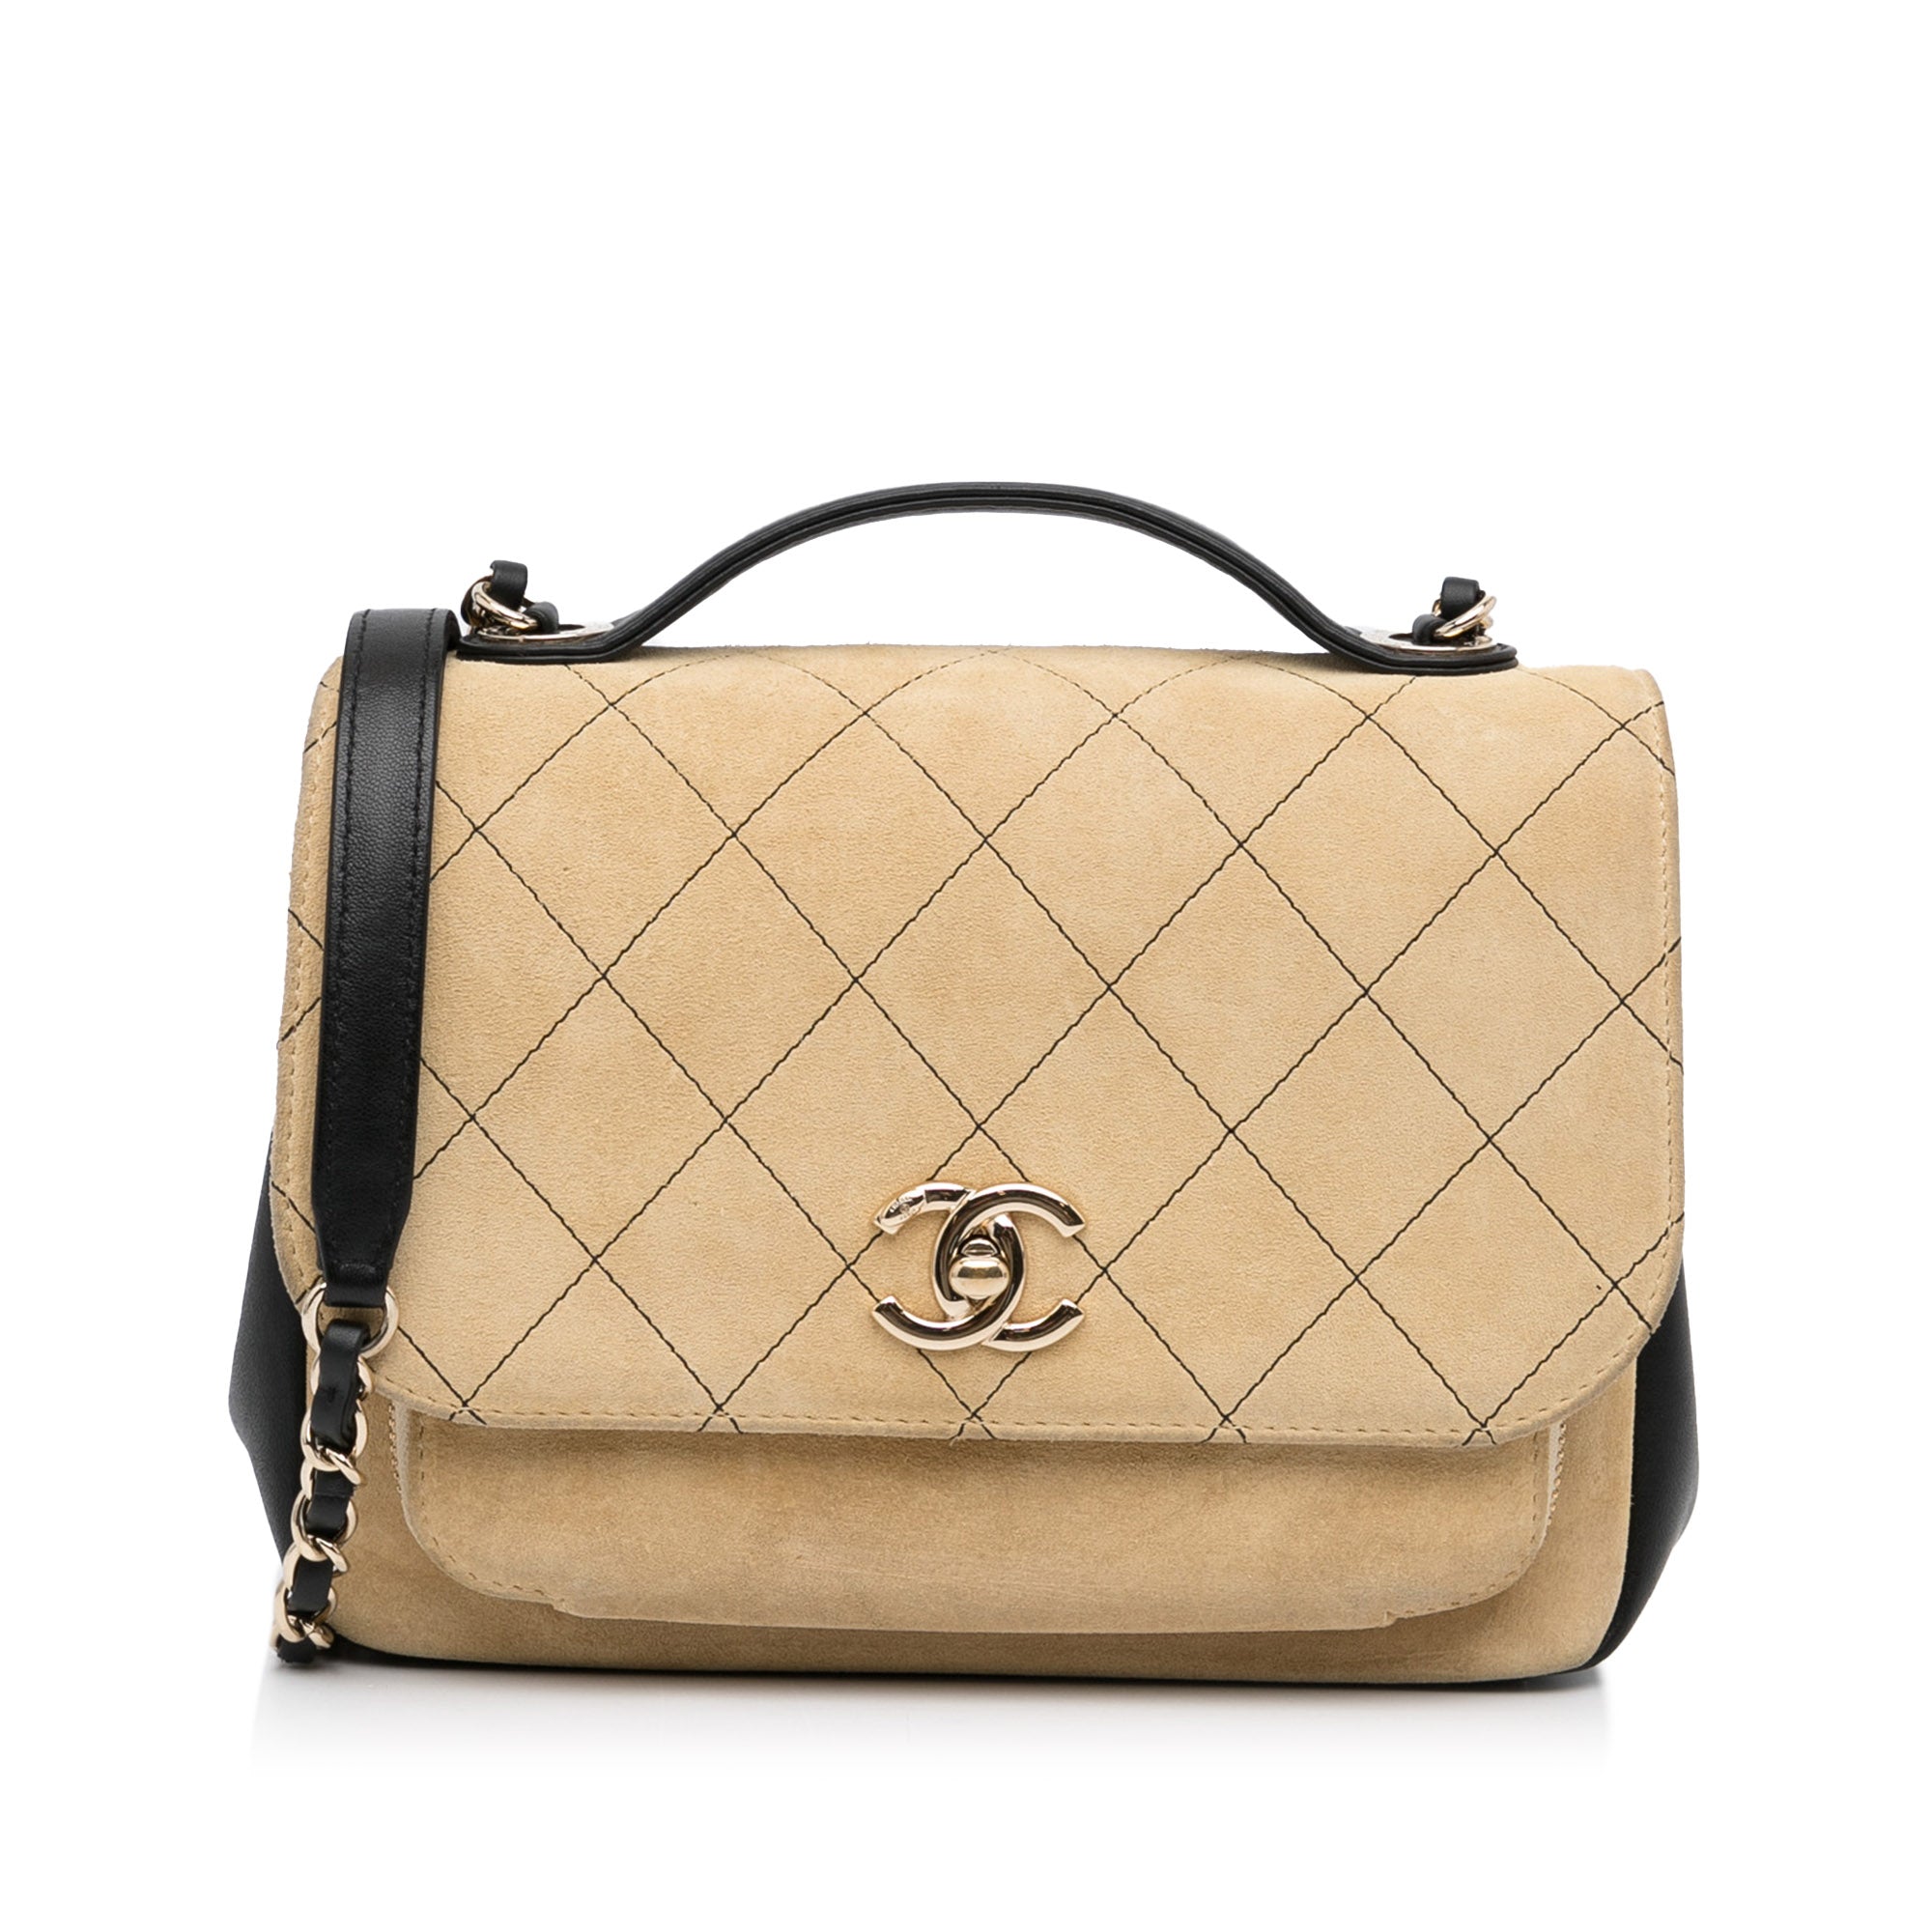 CHANEL BUSINESS AFFINITY REVIEW AND COMPARISON TO CHANEL 19 AND LV